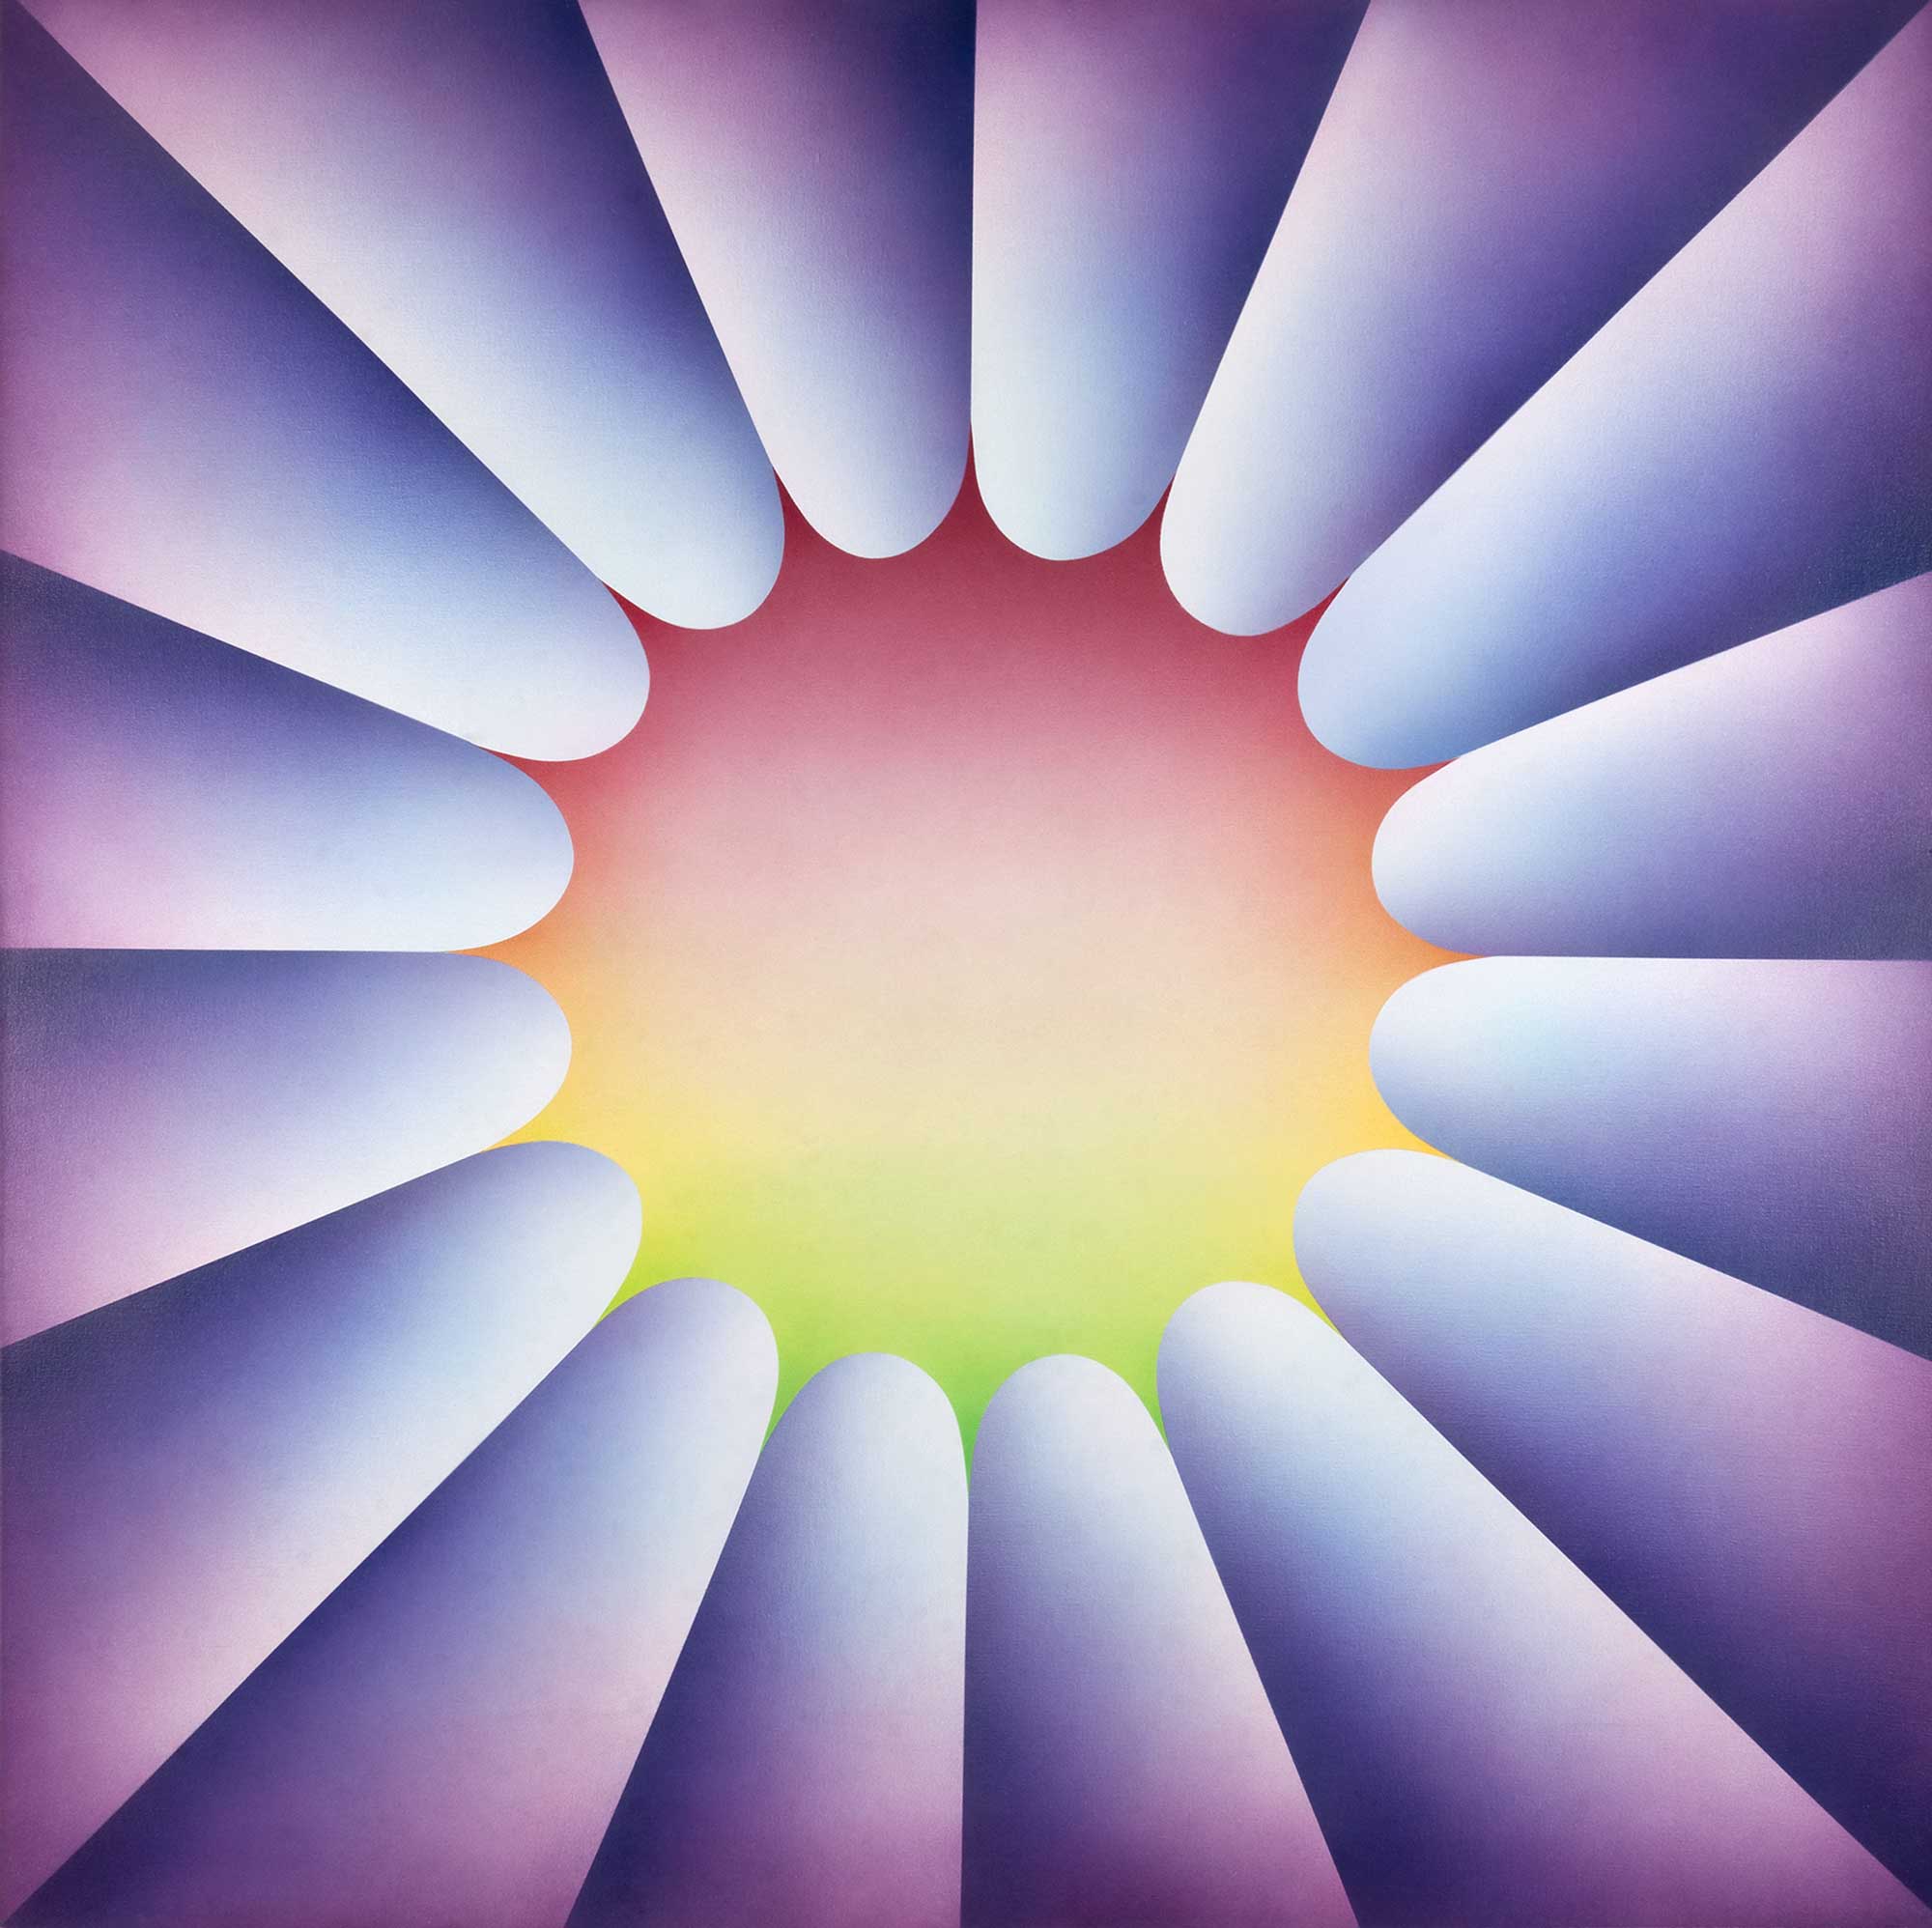 Judy Chicago, Through the Flower 2, 1973. Peinture acrylique en spray sur toile 152.4 x 152.4 cm. Collection Diane Gelon. © Judy Chicago/Artists Rights Society (ARS), New York. Photo © Donald Woodman/Artists Rights Society (ARS), New York